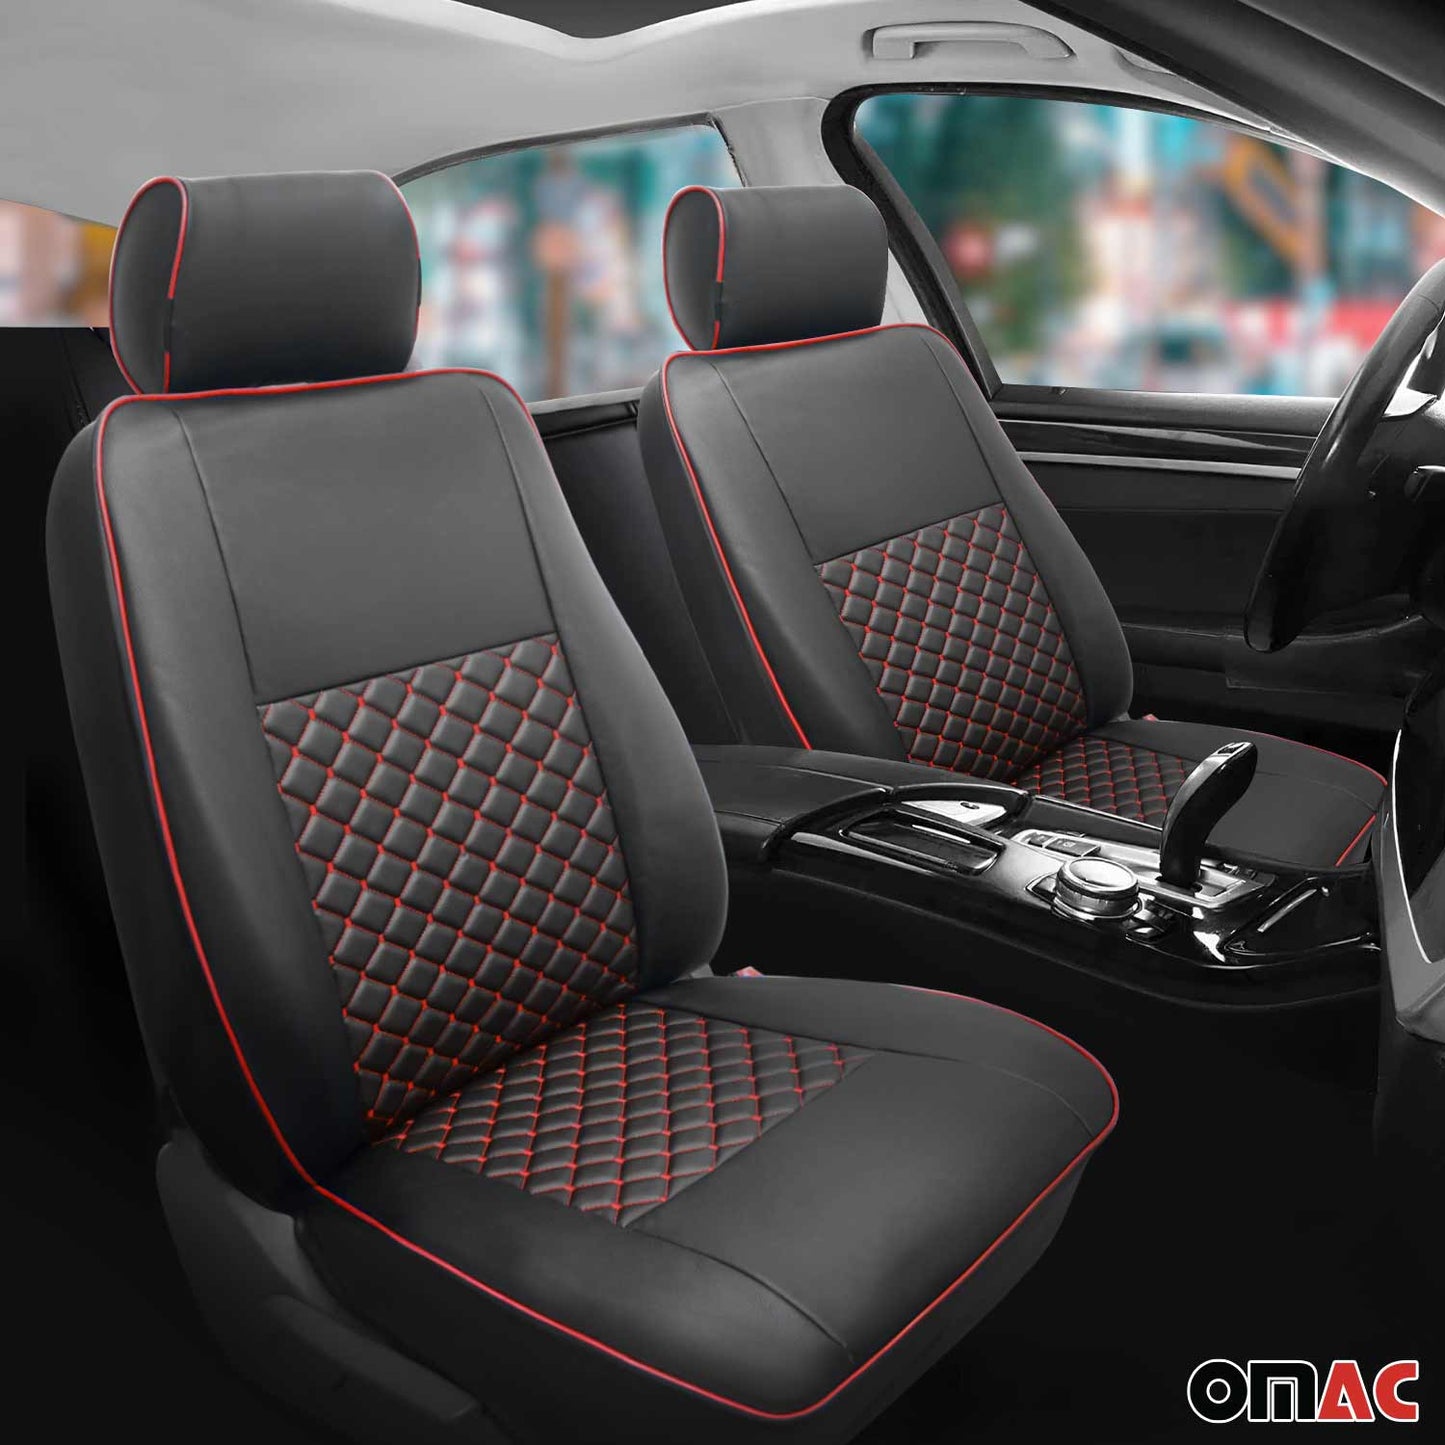 OMAC Leather Custom fit Seat Covers for Mercedes Sprinter W906 2006-2018 Black Red 4724321A-SK1